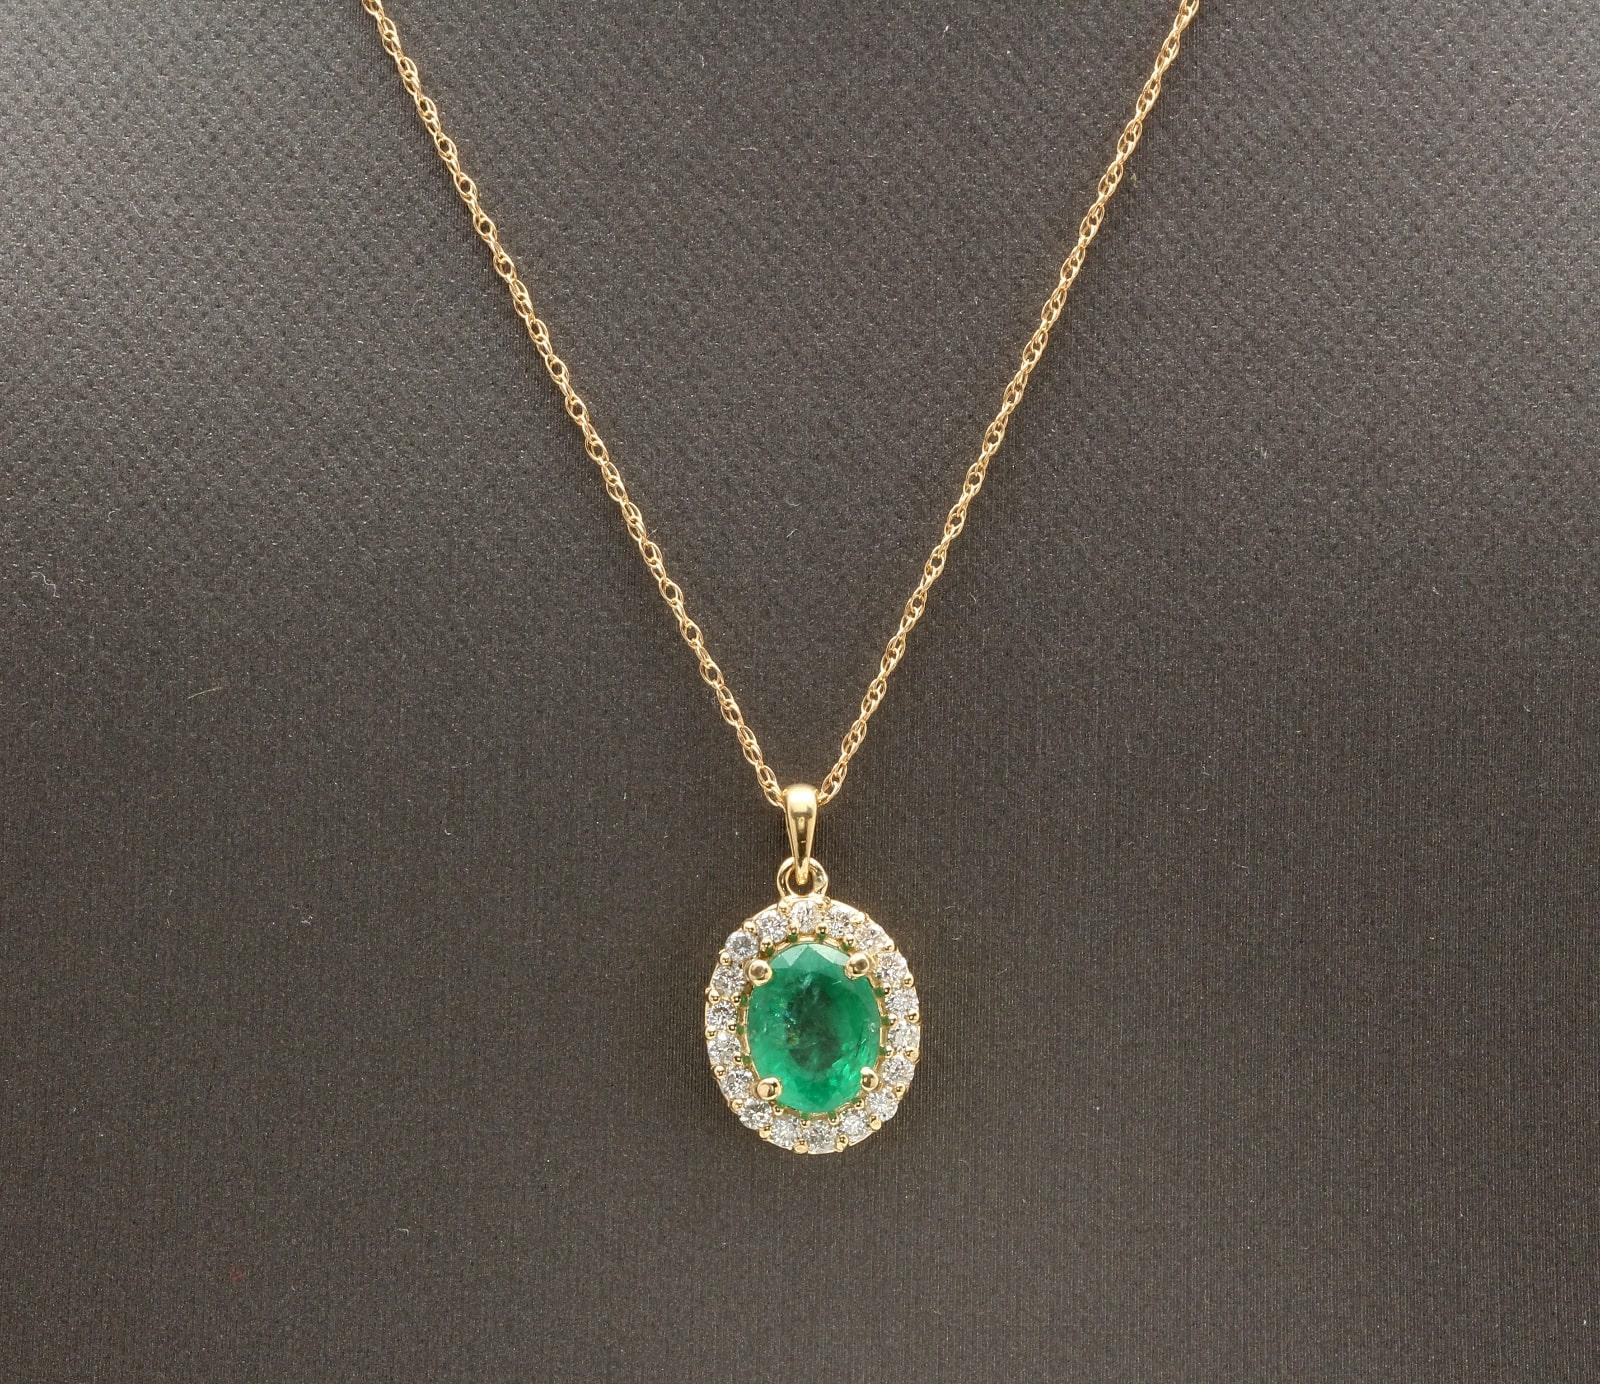 2.10Ct Natural Emerald and Diamond 14K Solid Yellow Gold Necklace

Amazing looking piece! 

Stamped: 14K

Suggested Replacement Value: $4,500.00 

Natural Emerald Weights: Approx. 1.70 Carats

Emerald Treatment: Oiling

Emerald Measures: Approx.